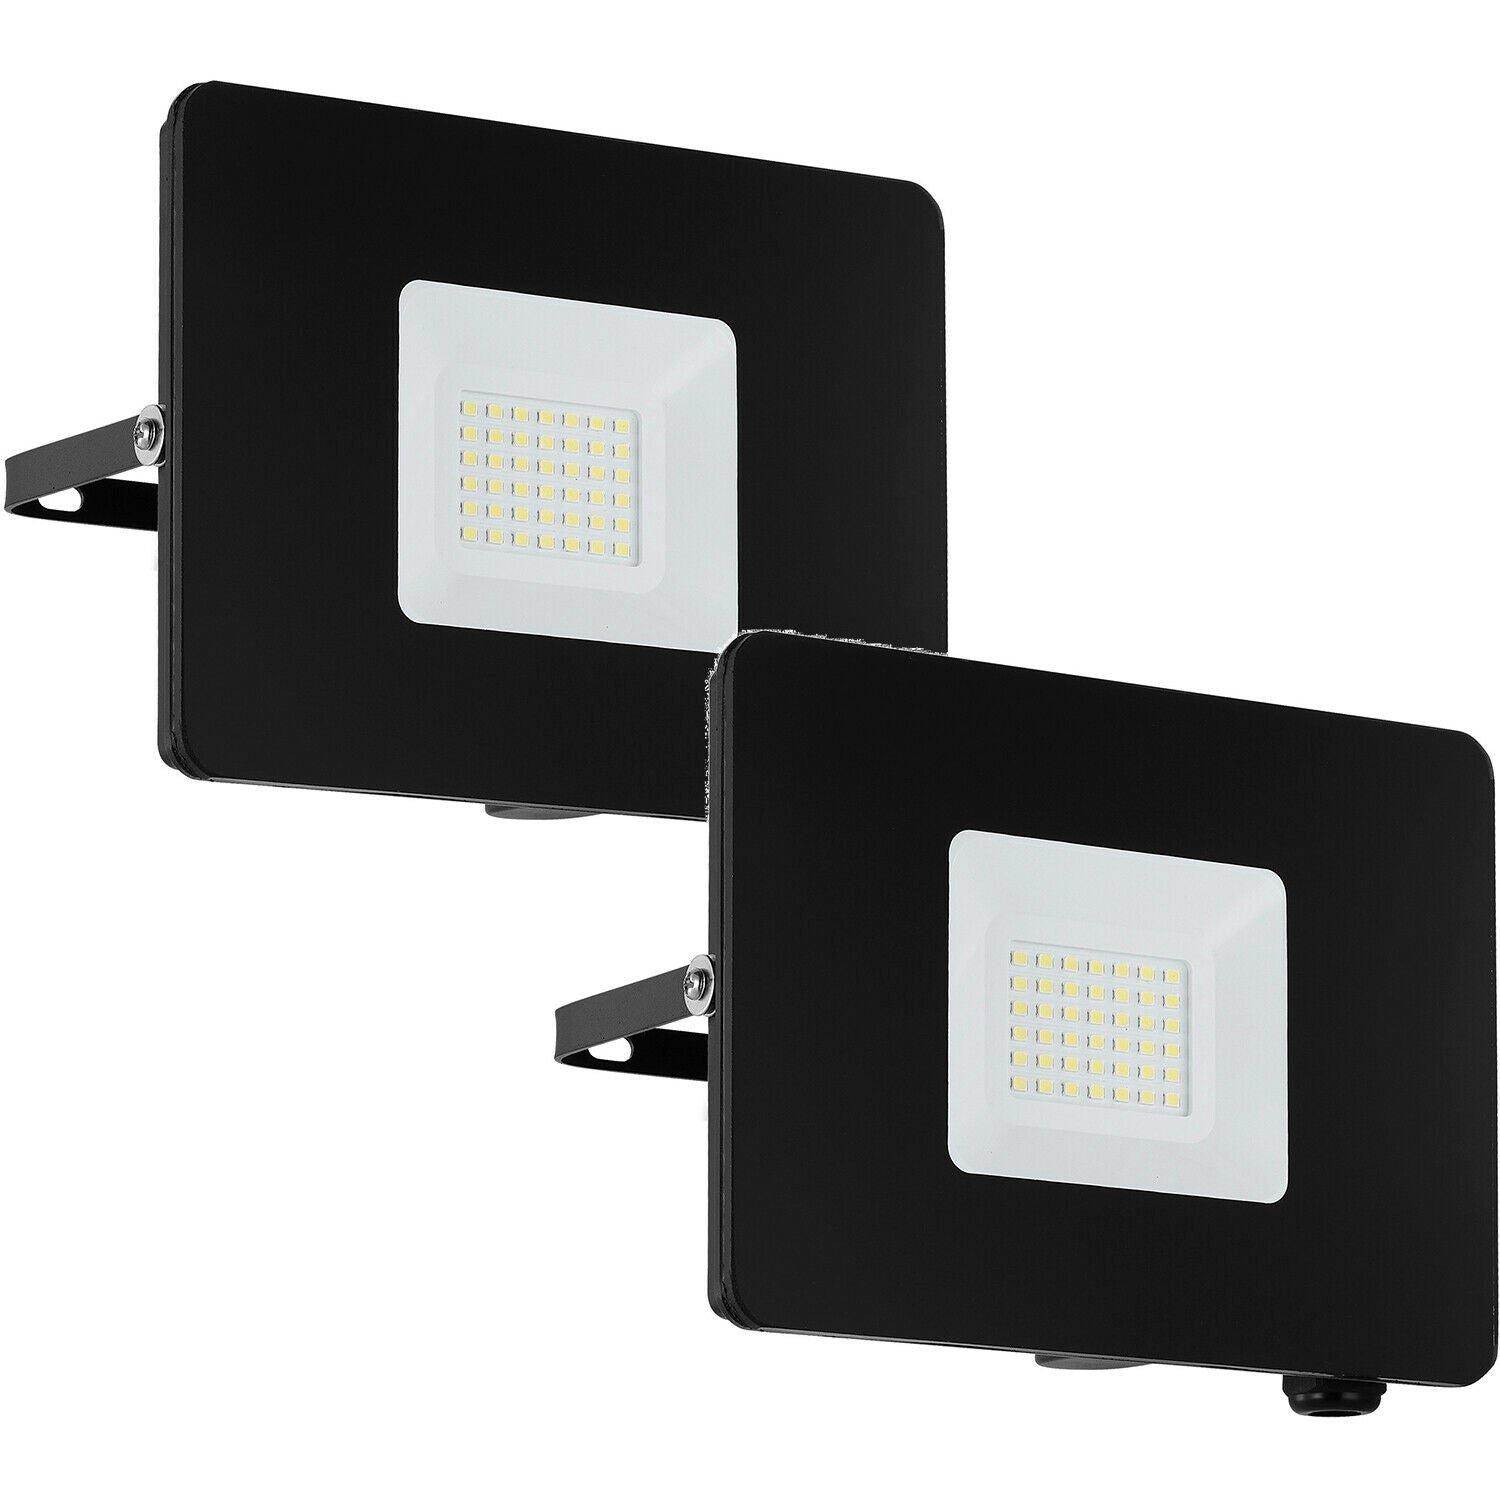 2 PACK IP65 Outdoor Wall Flood Light Black Adjustable 30W LED Porch Lamp